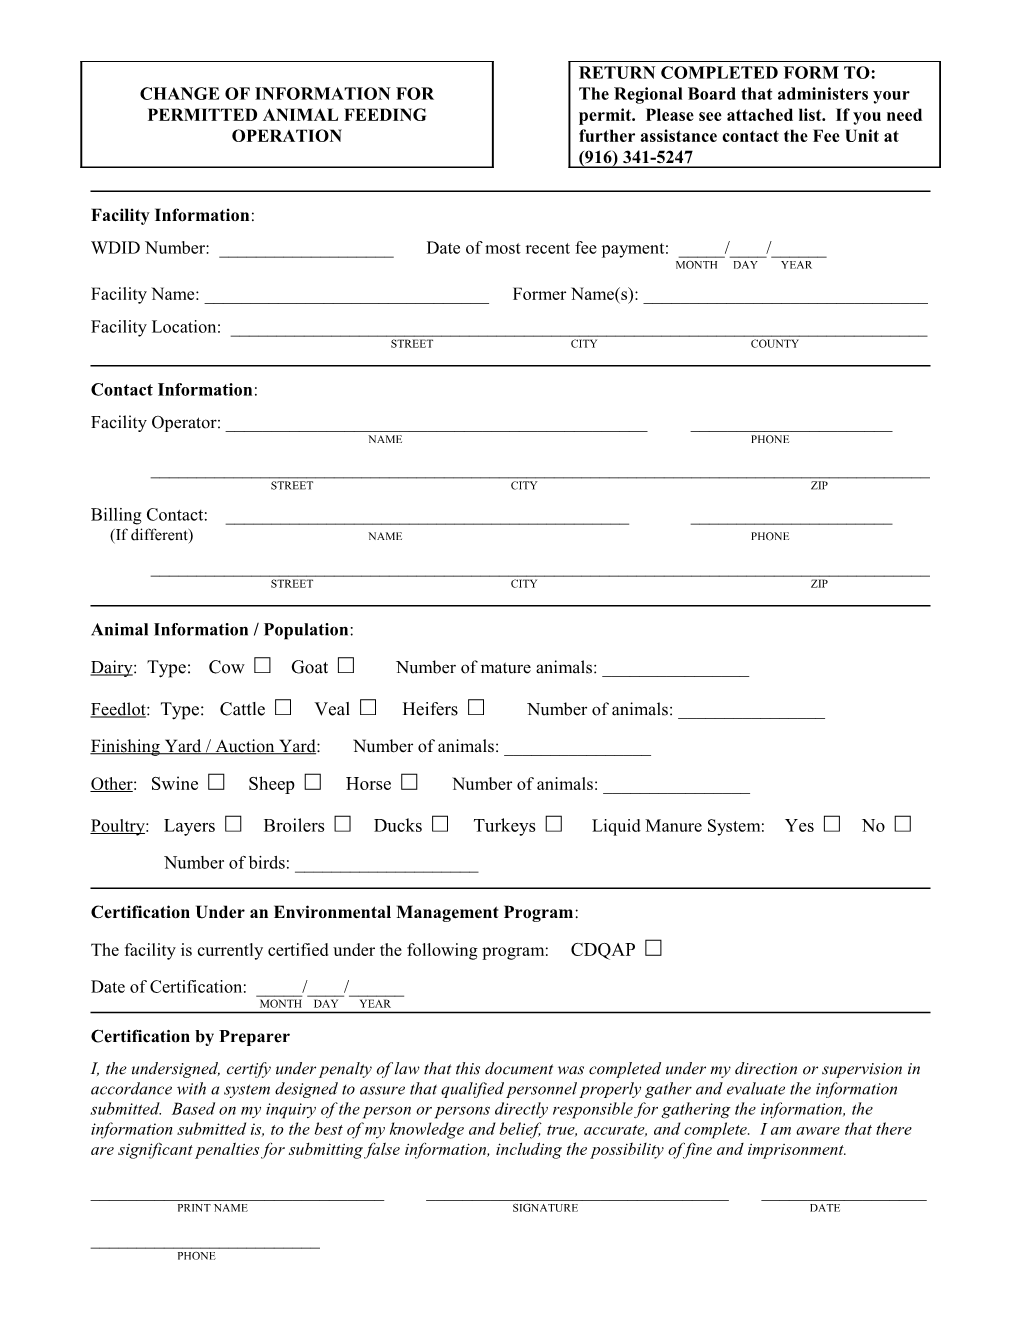 Annual Report Form for Dairies Subject to A